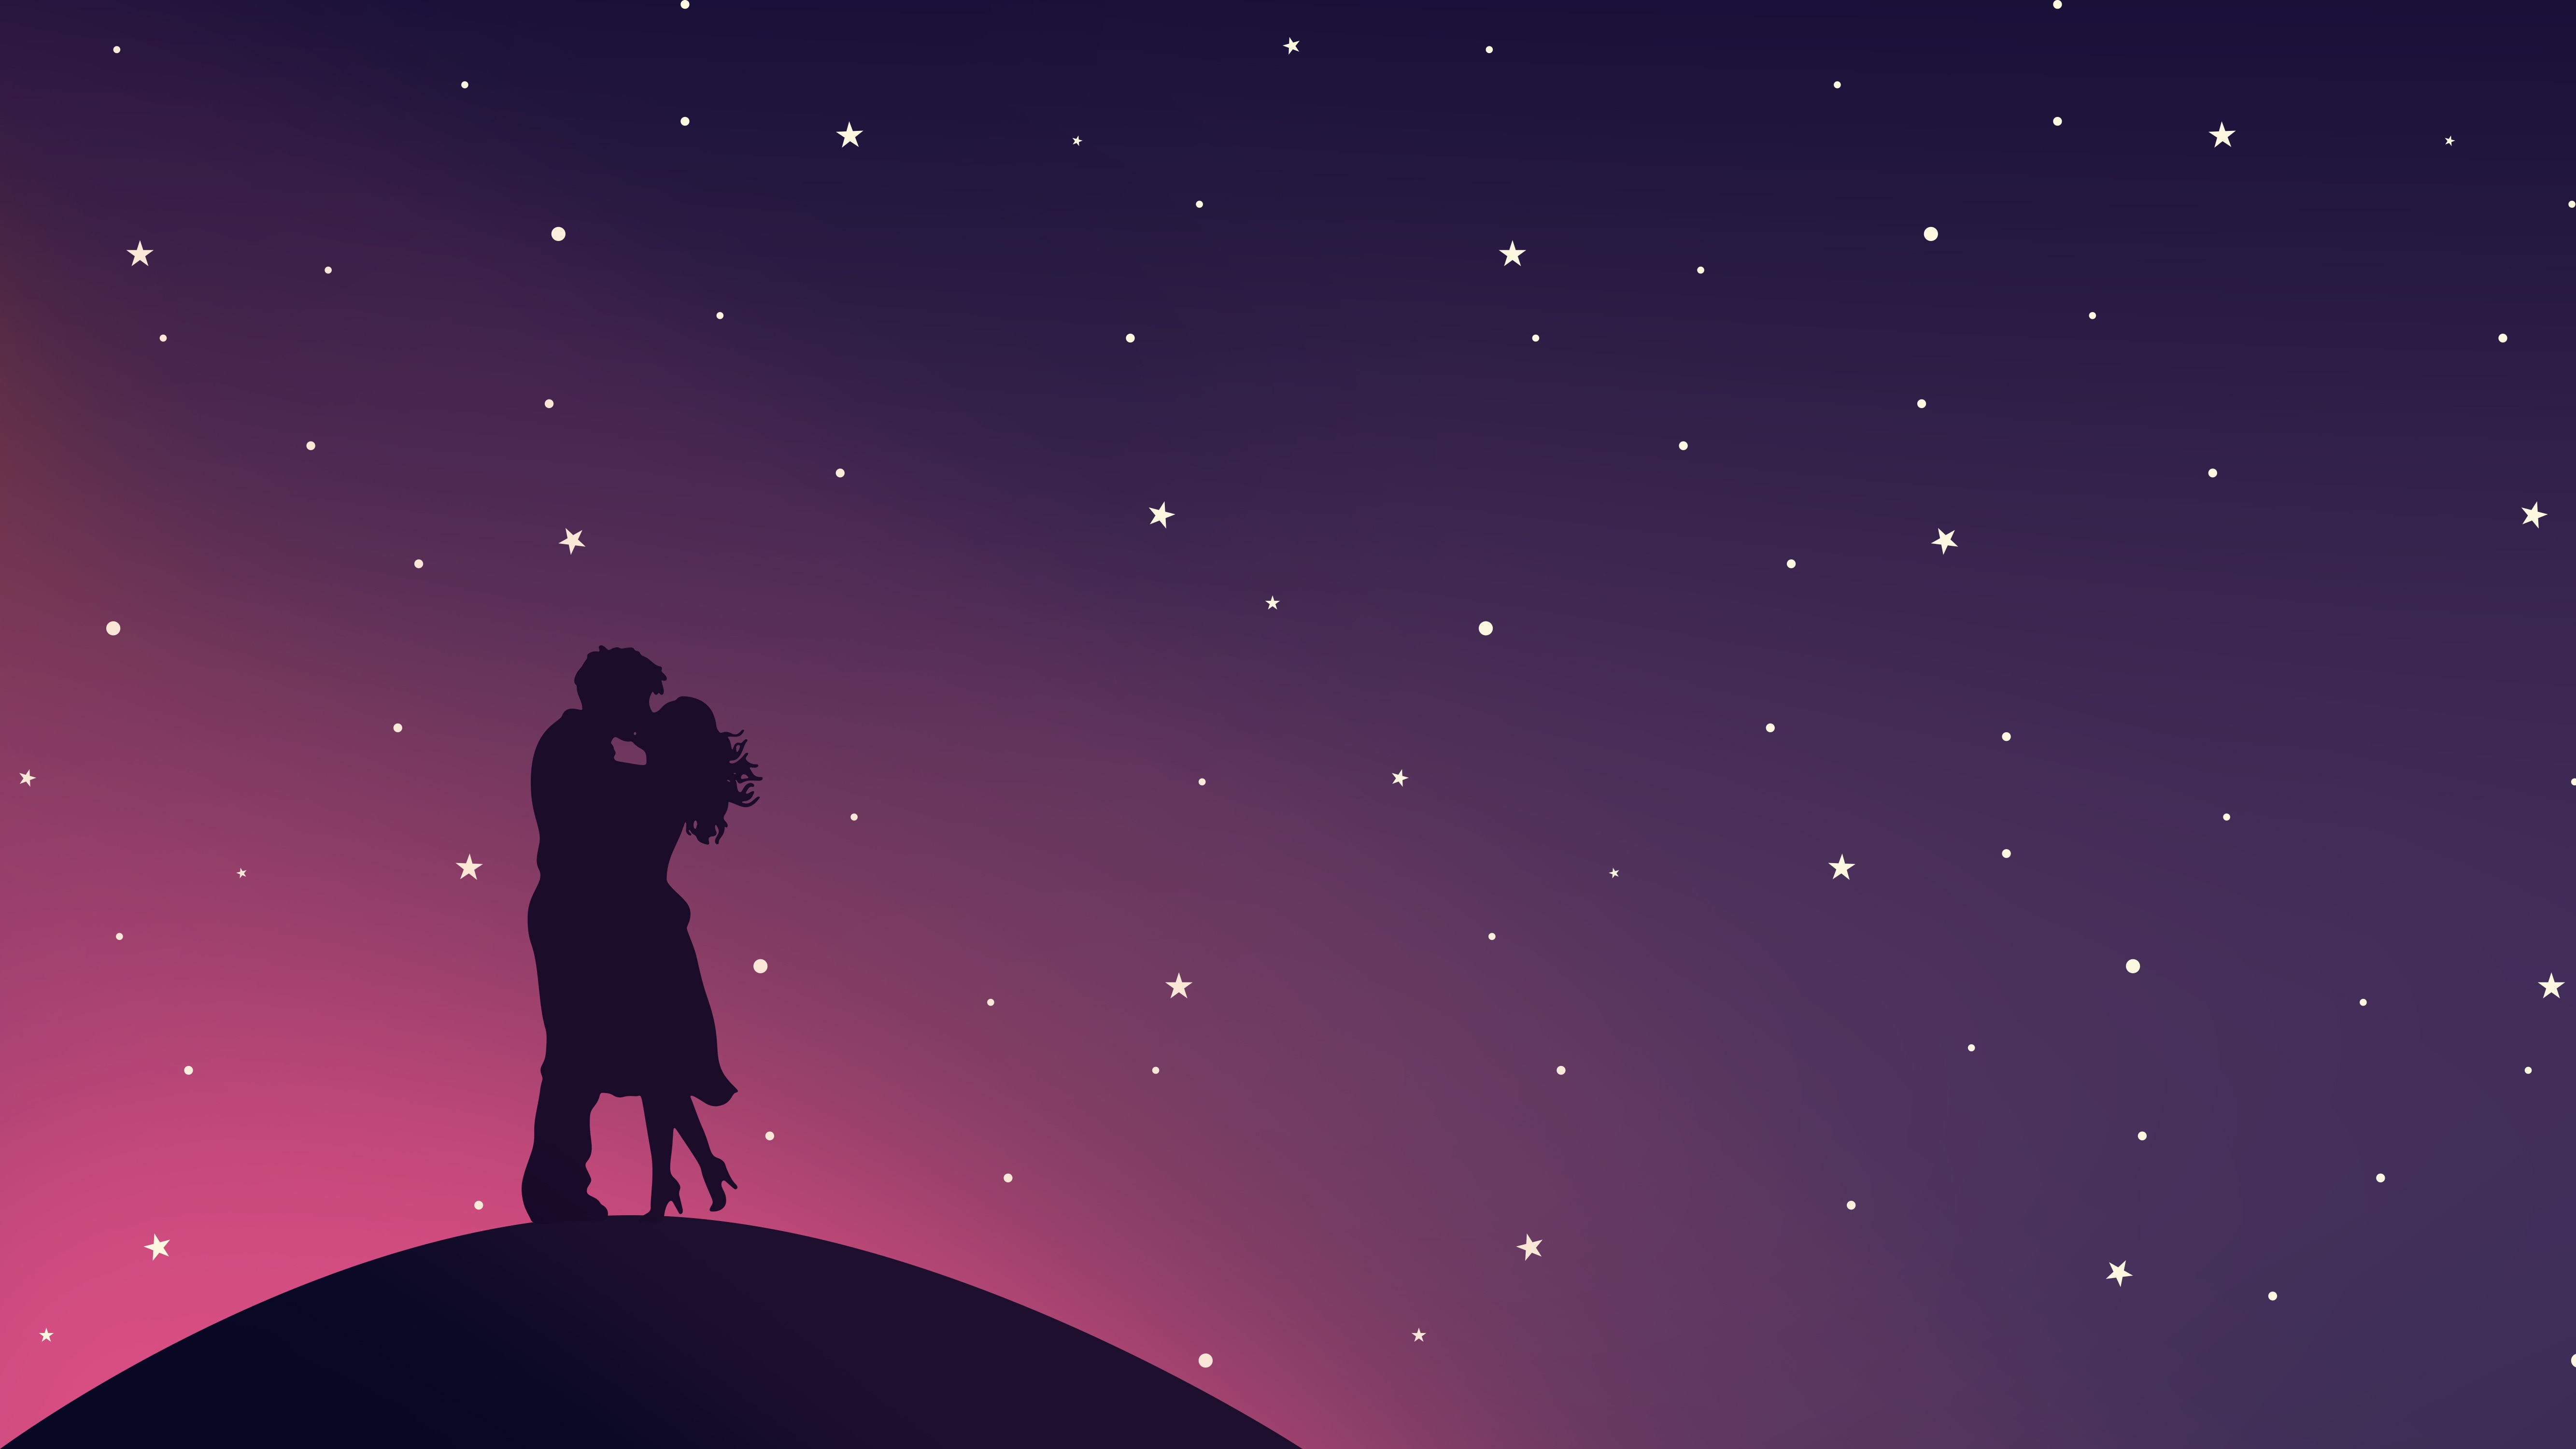 127832 download wallpaper stars, vector, couple, pair, silhouettes, kiss, embrace screensavers and pictures for free